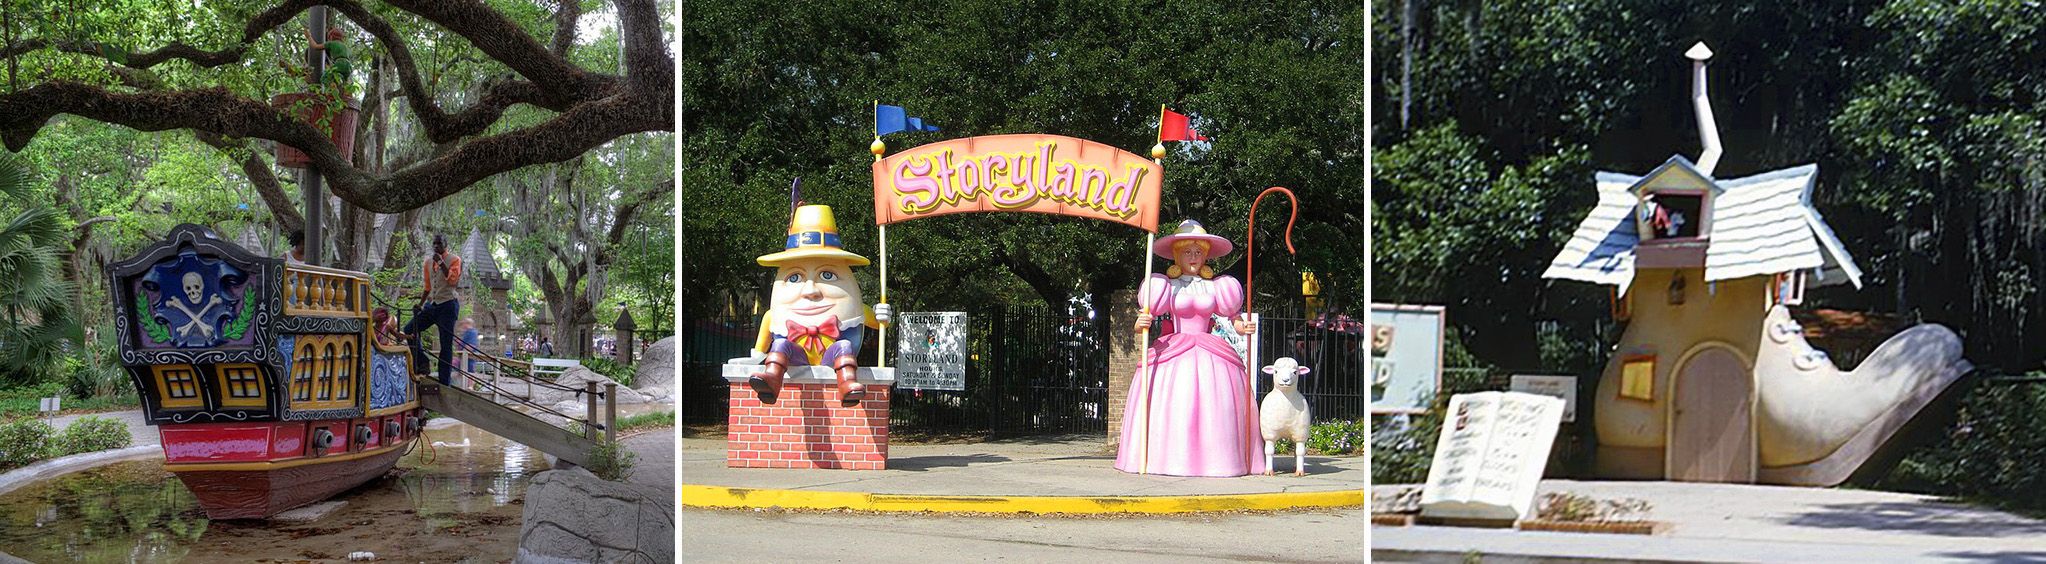 Storyland in New Orleans